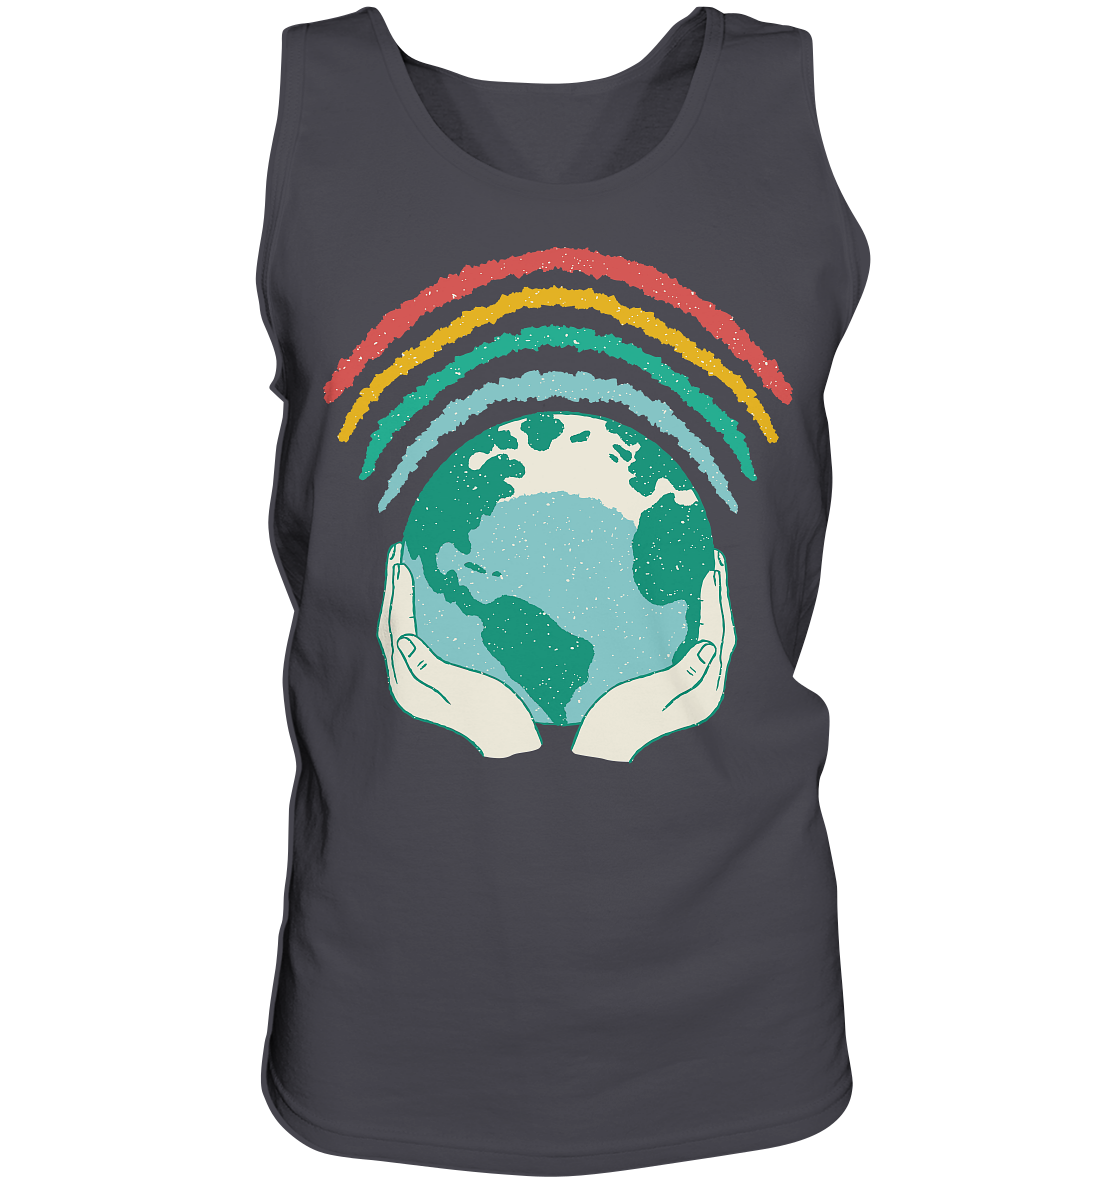 Rainbow with globe in hands - tank top